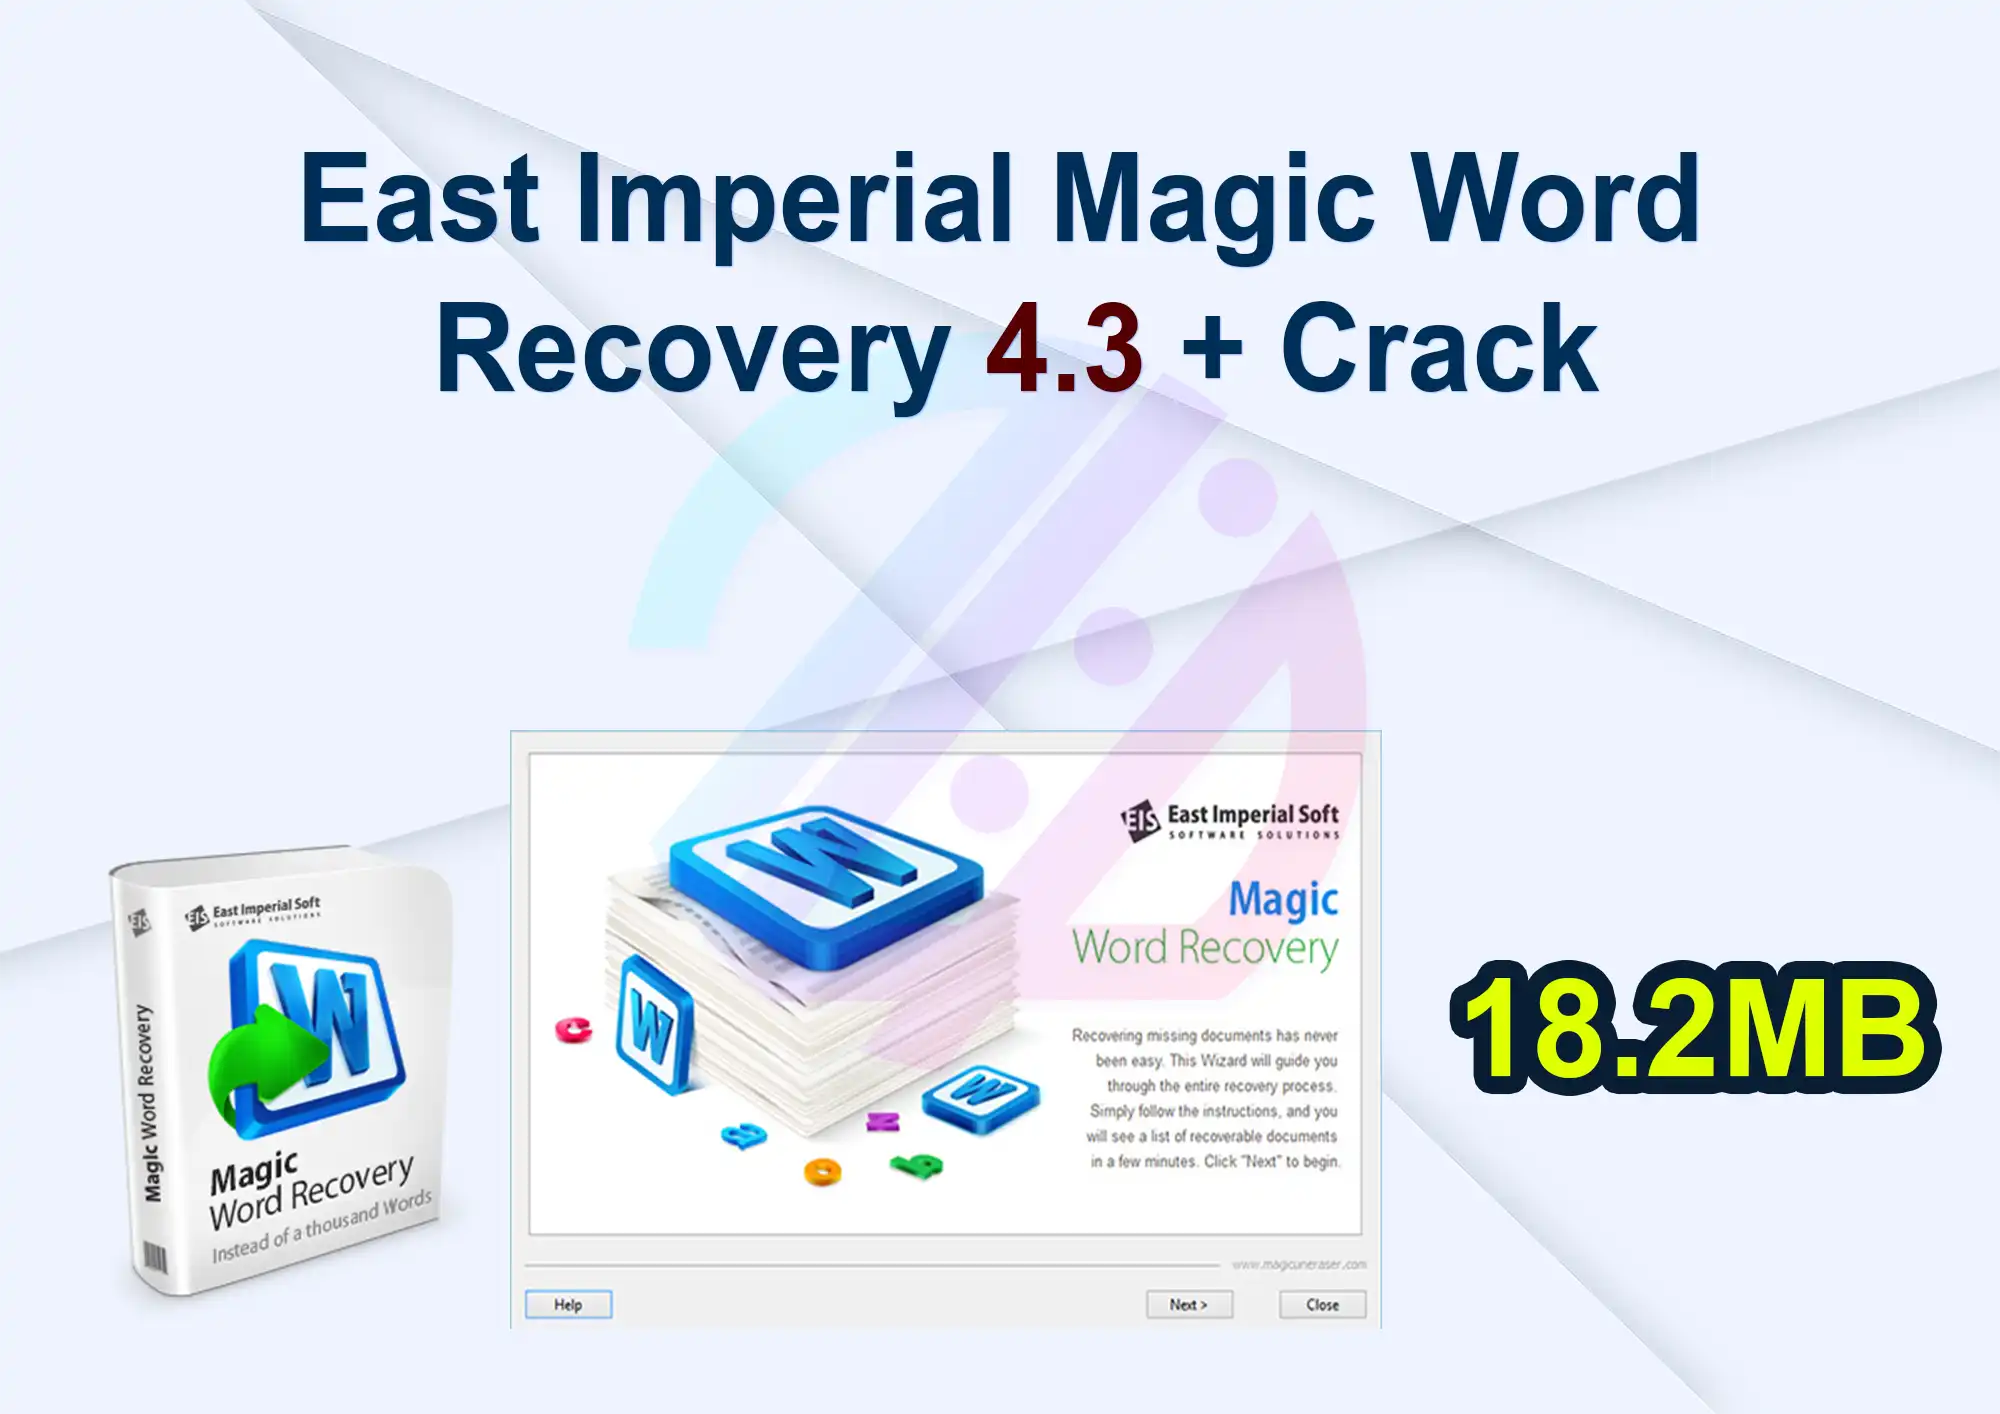 East Imperial Magic Word Recovery 4.3 + Crack